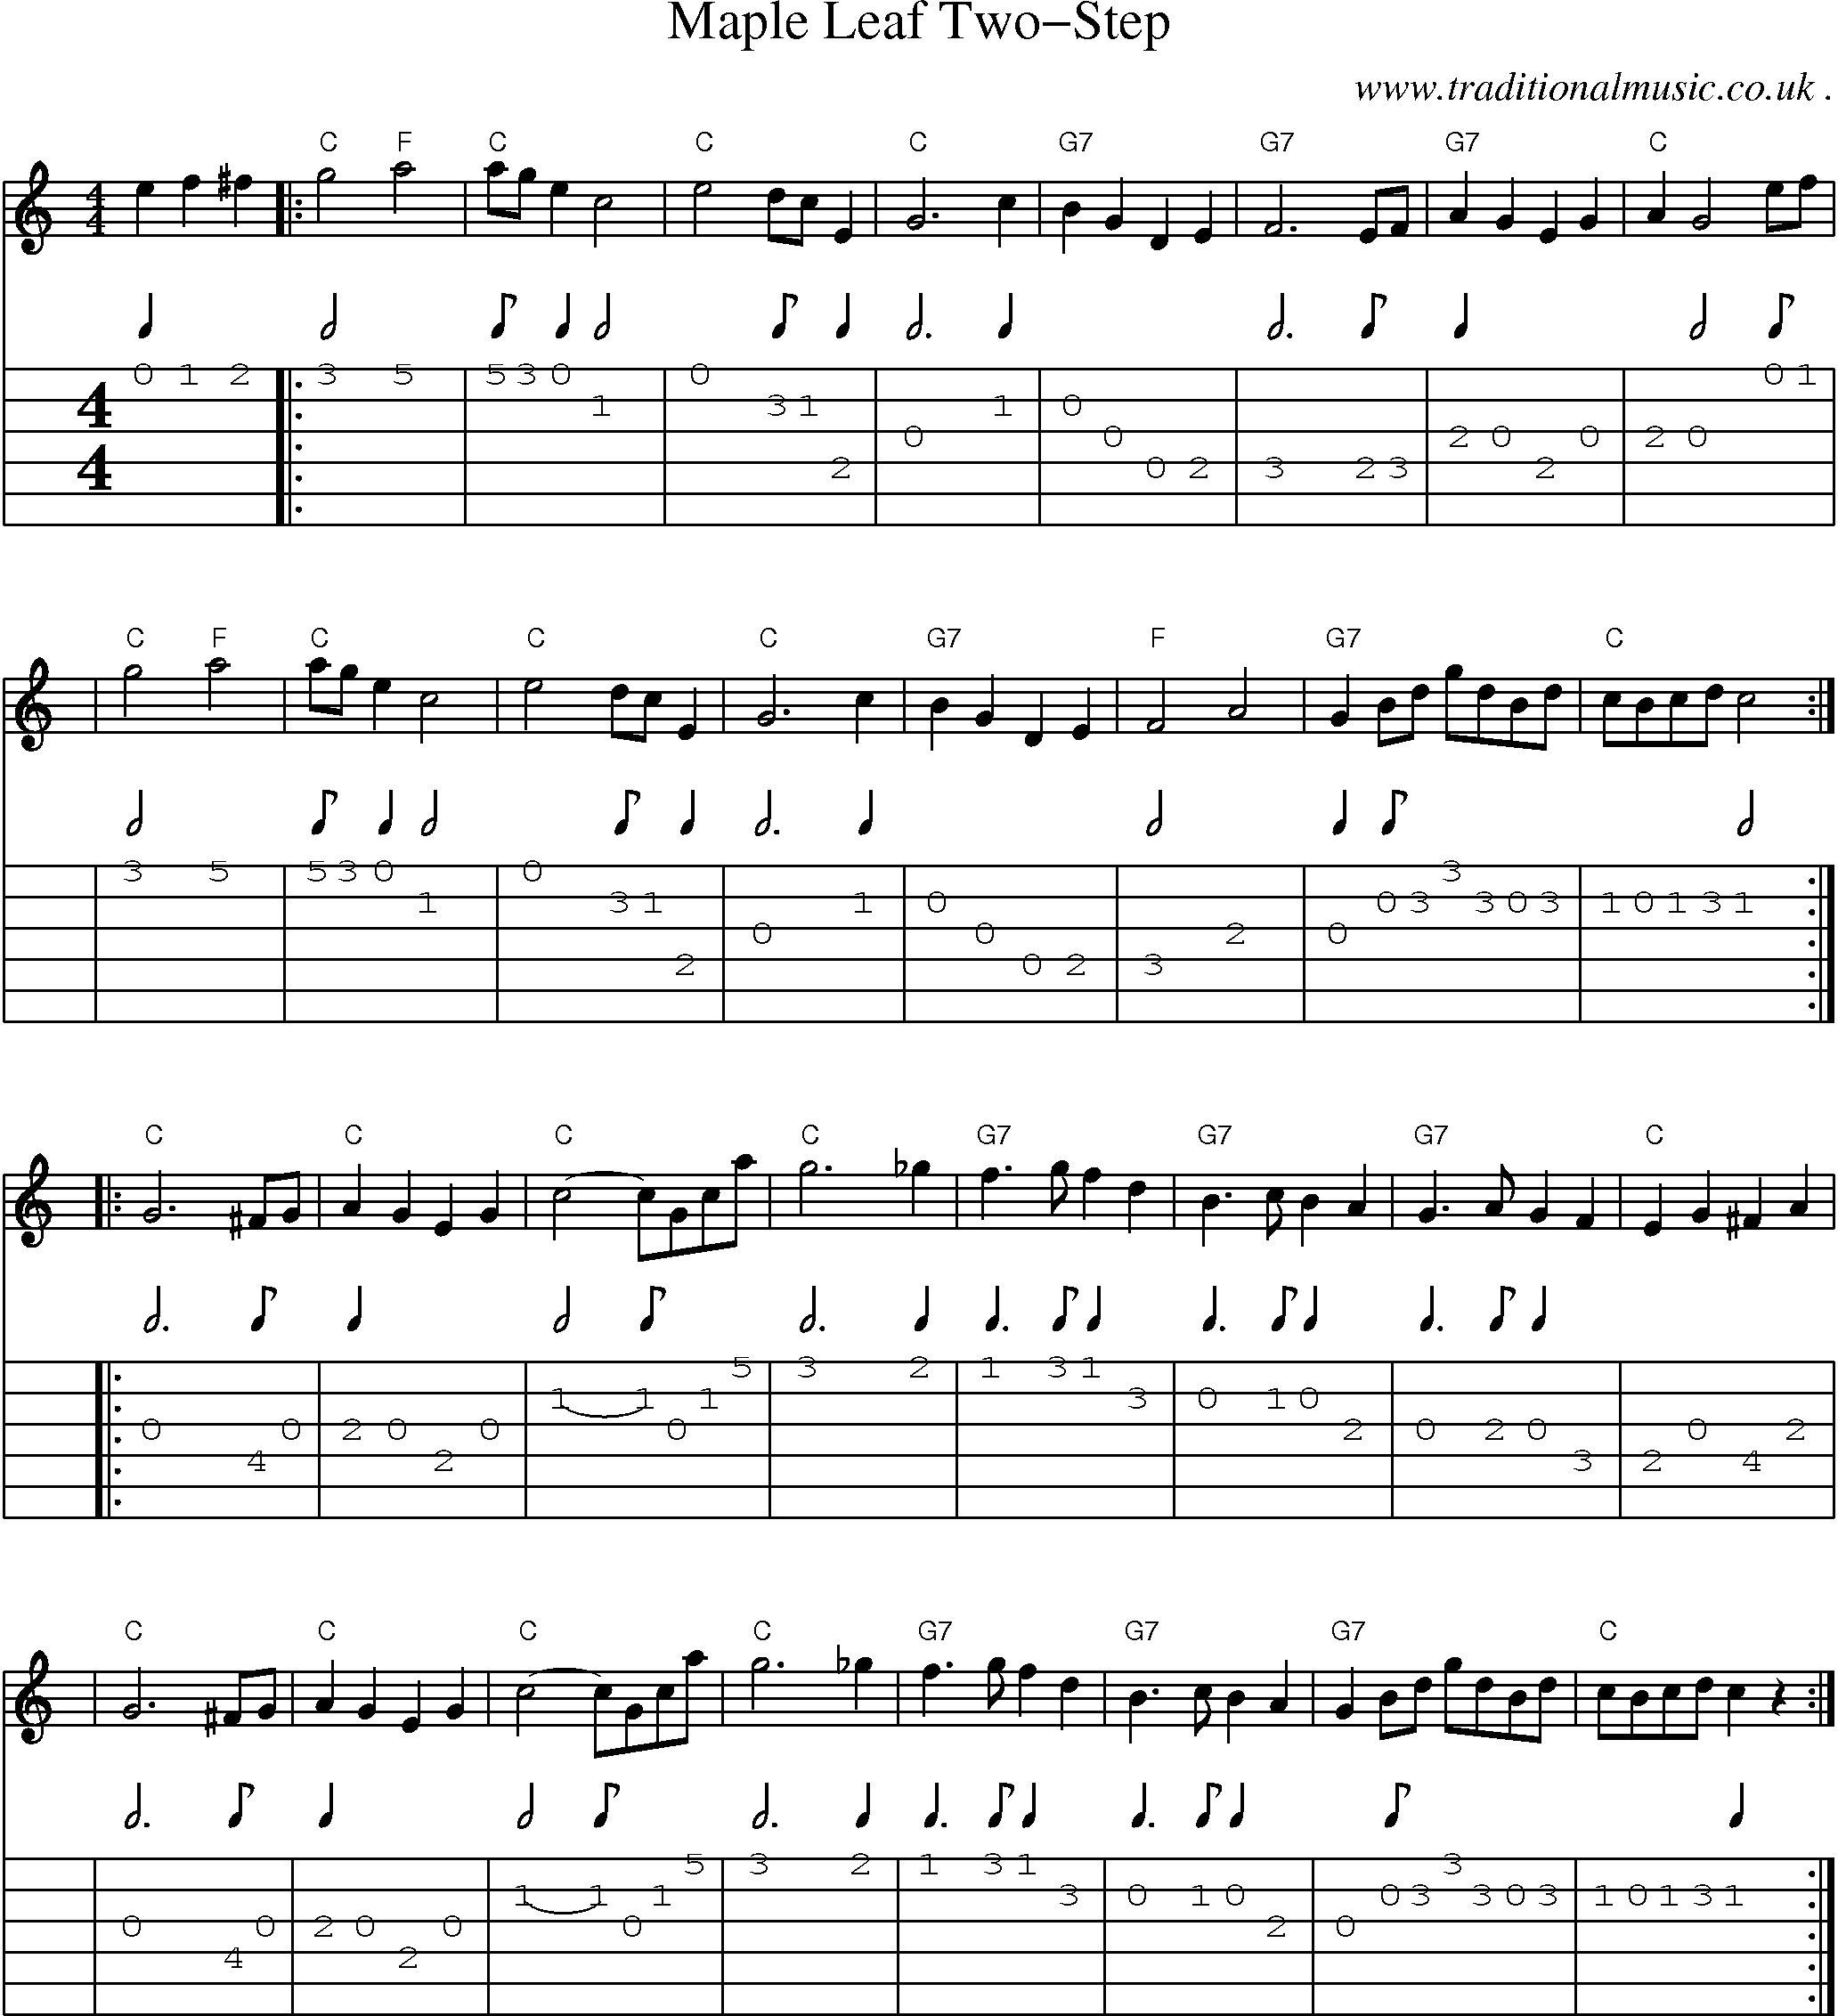 Sheet-music  score, Chords and Guitar Tabs for Maple Leaf Two-step